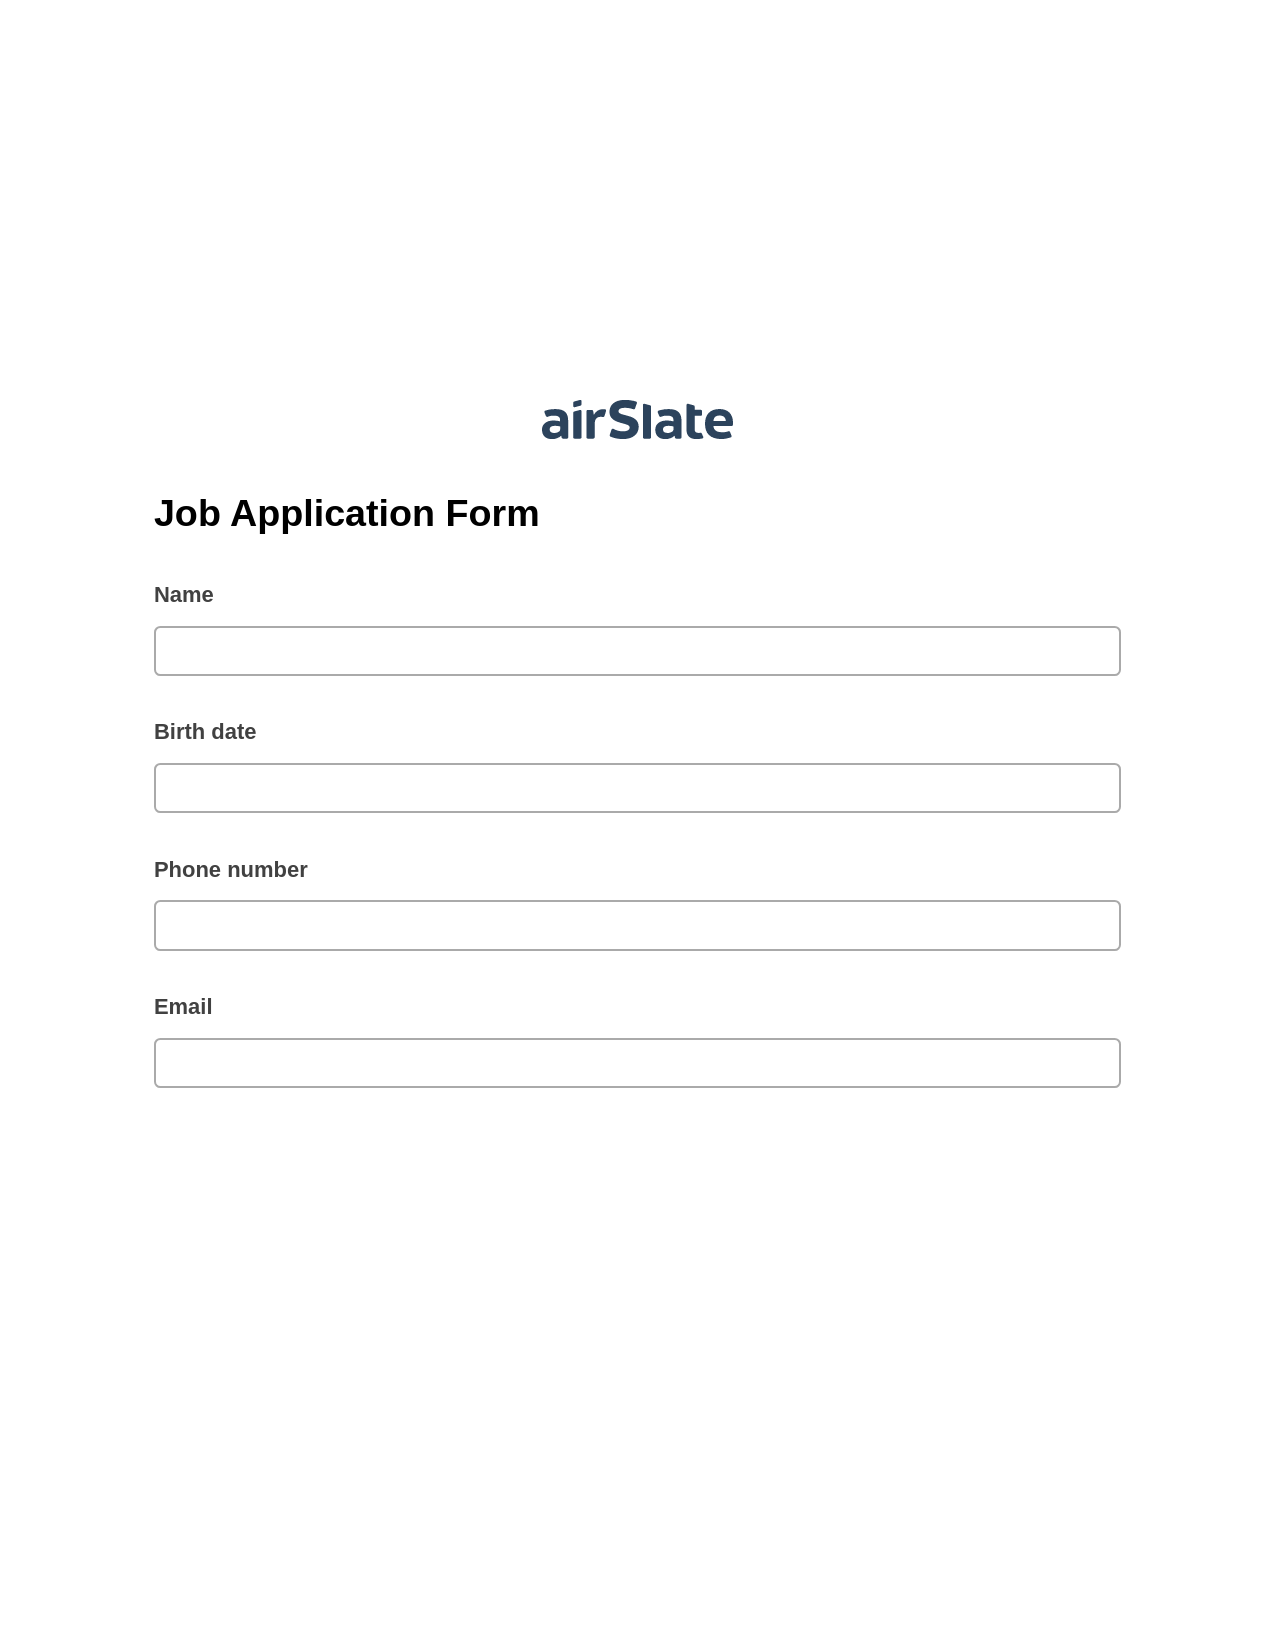 Multirole Job Application Form Pre-fill from CSV File Dropdown Options Bot, Create NetSuite Records Bot, Export to Formstack Documents Bot